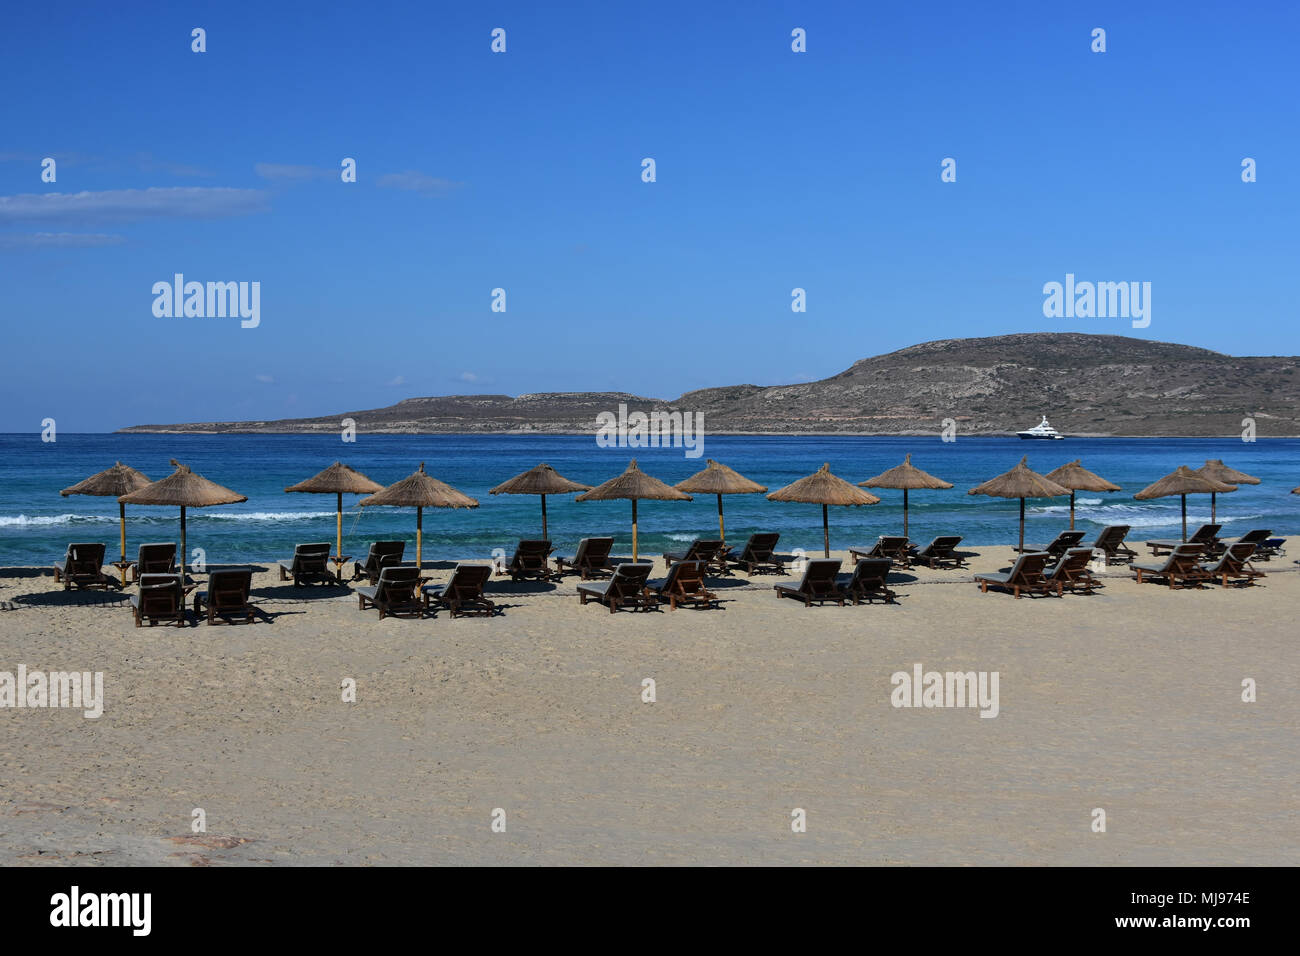 Wide sandy beach with old umbrellas and empty chaise longue, quiet turquoise sea, white yacht far away in the bay, serene blue sky Stock Photo